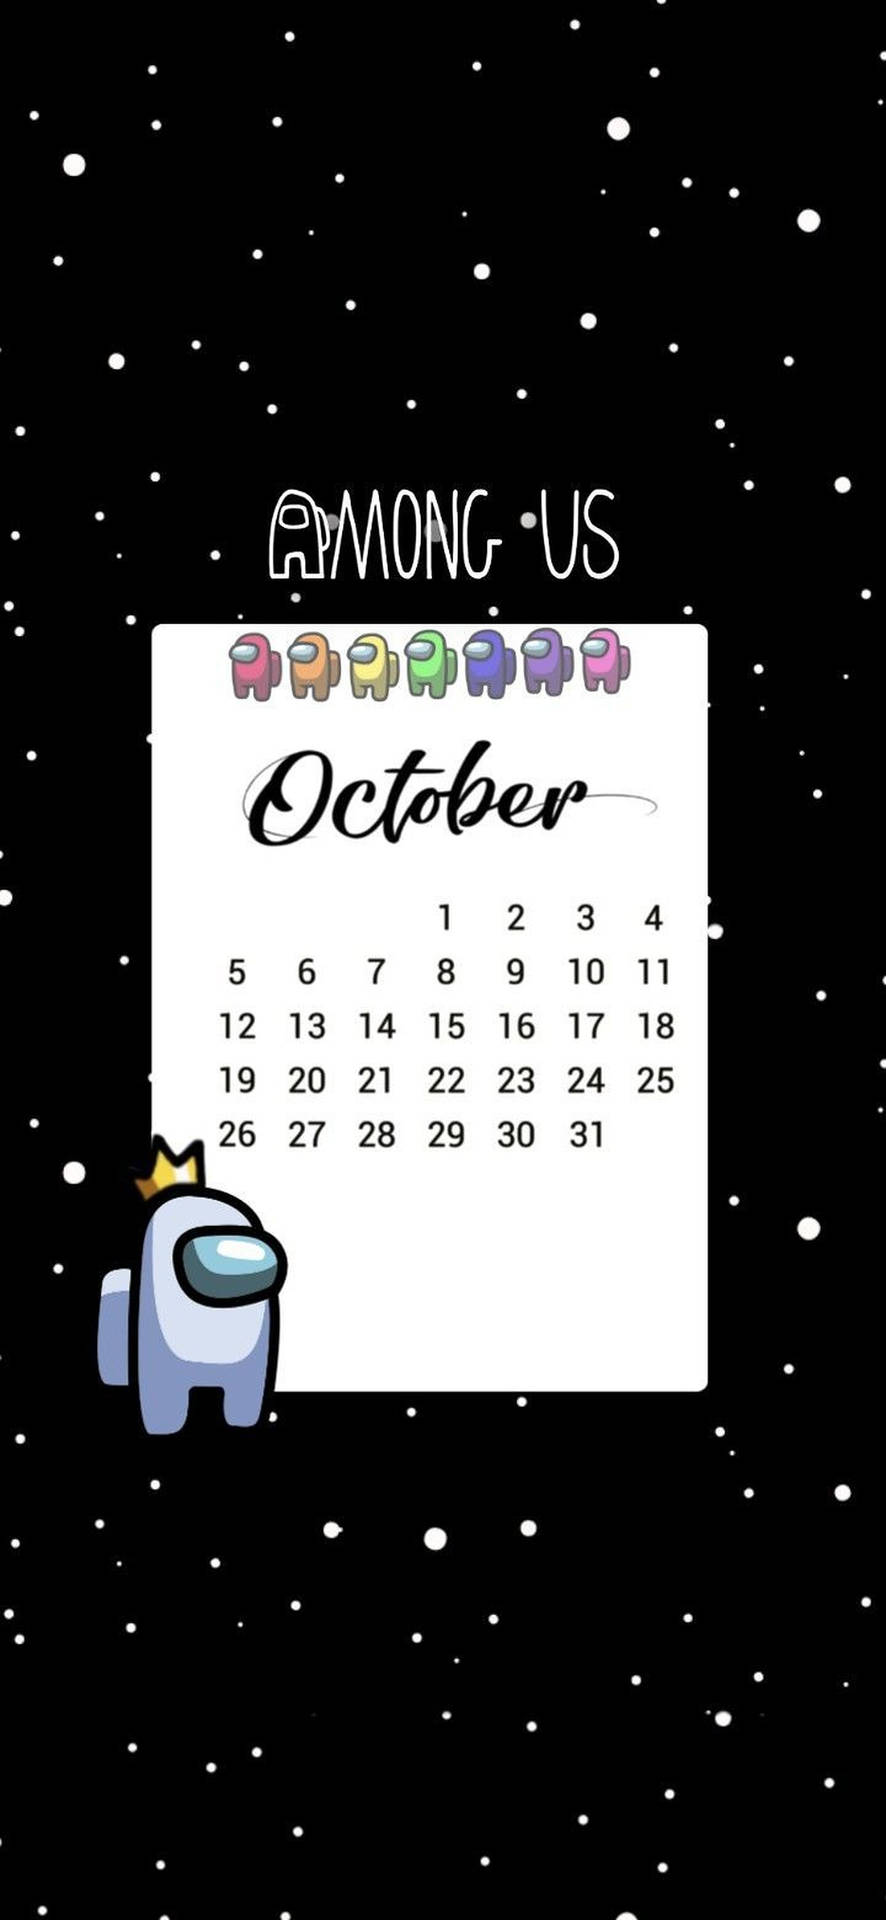 Among Us Space October Calendar Background